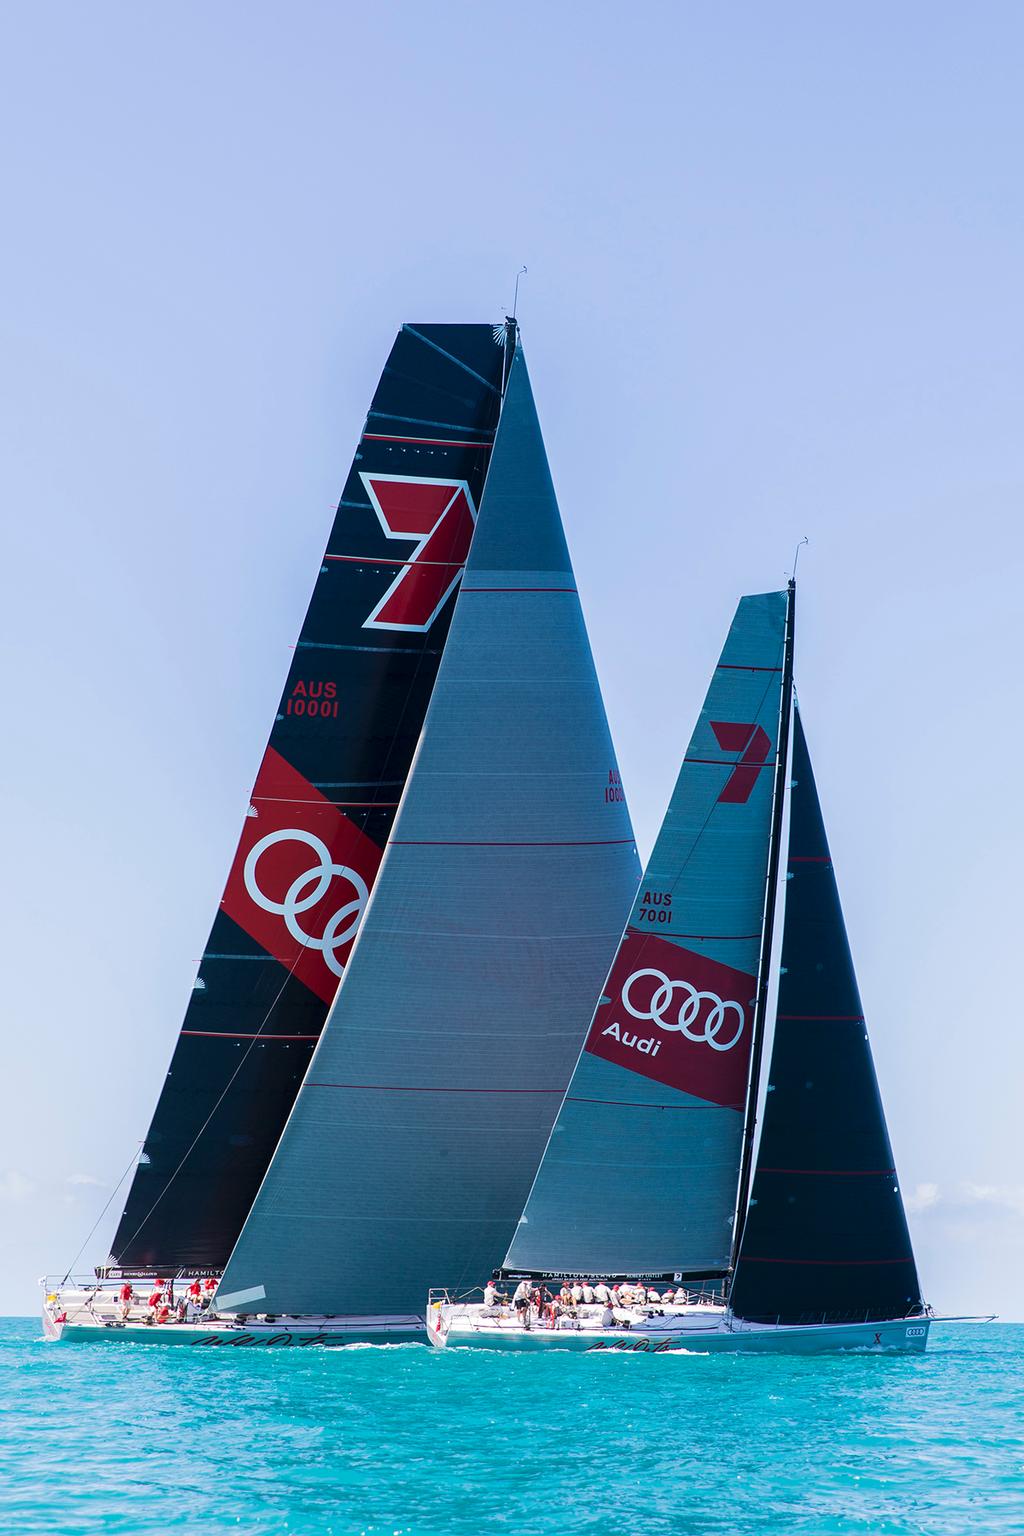 Seeing double: supermaxi Wild Oats XI towers over the smaller Wild Oats X at Audi Hamilton Island Race Week 2017 © Andrea Francolini http://www.afrancolini.com/